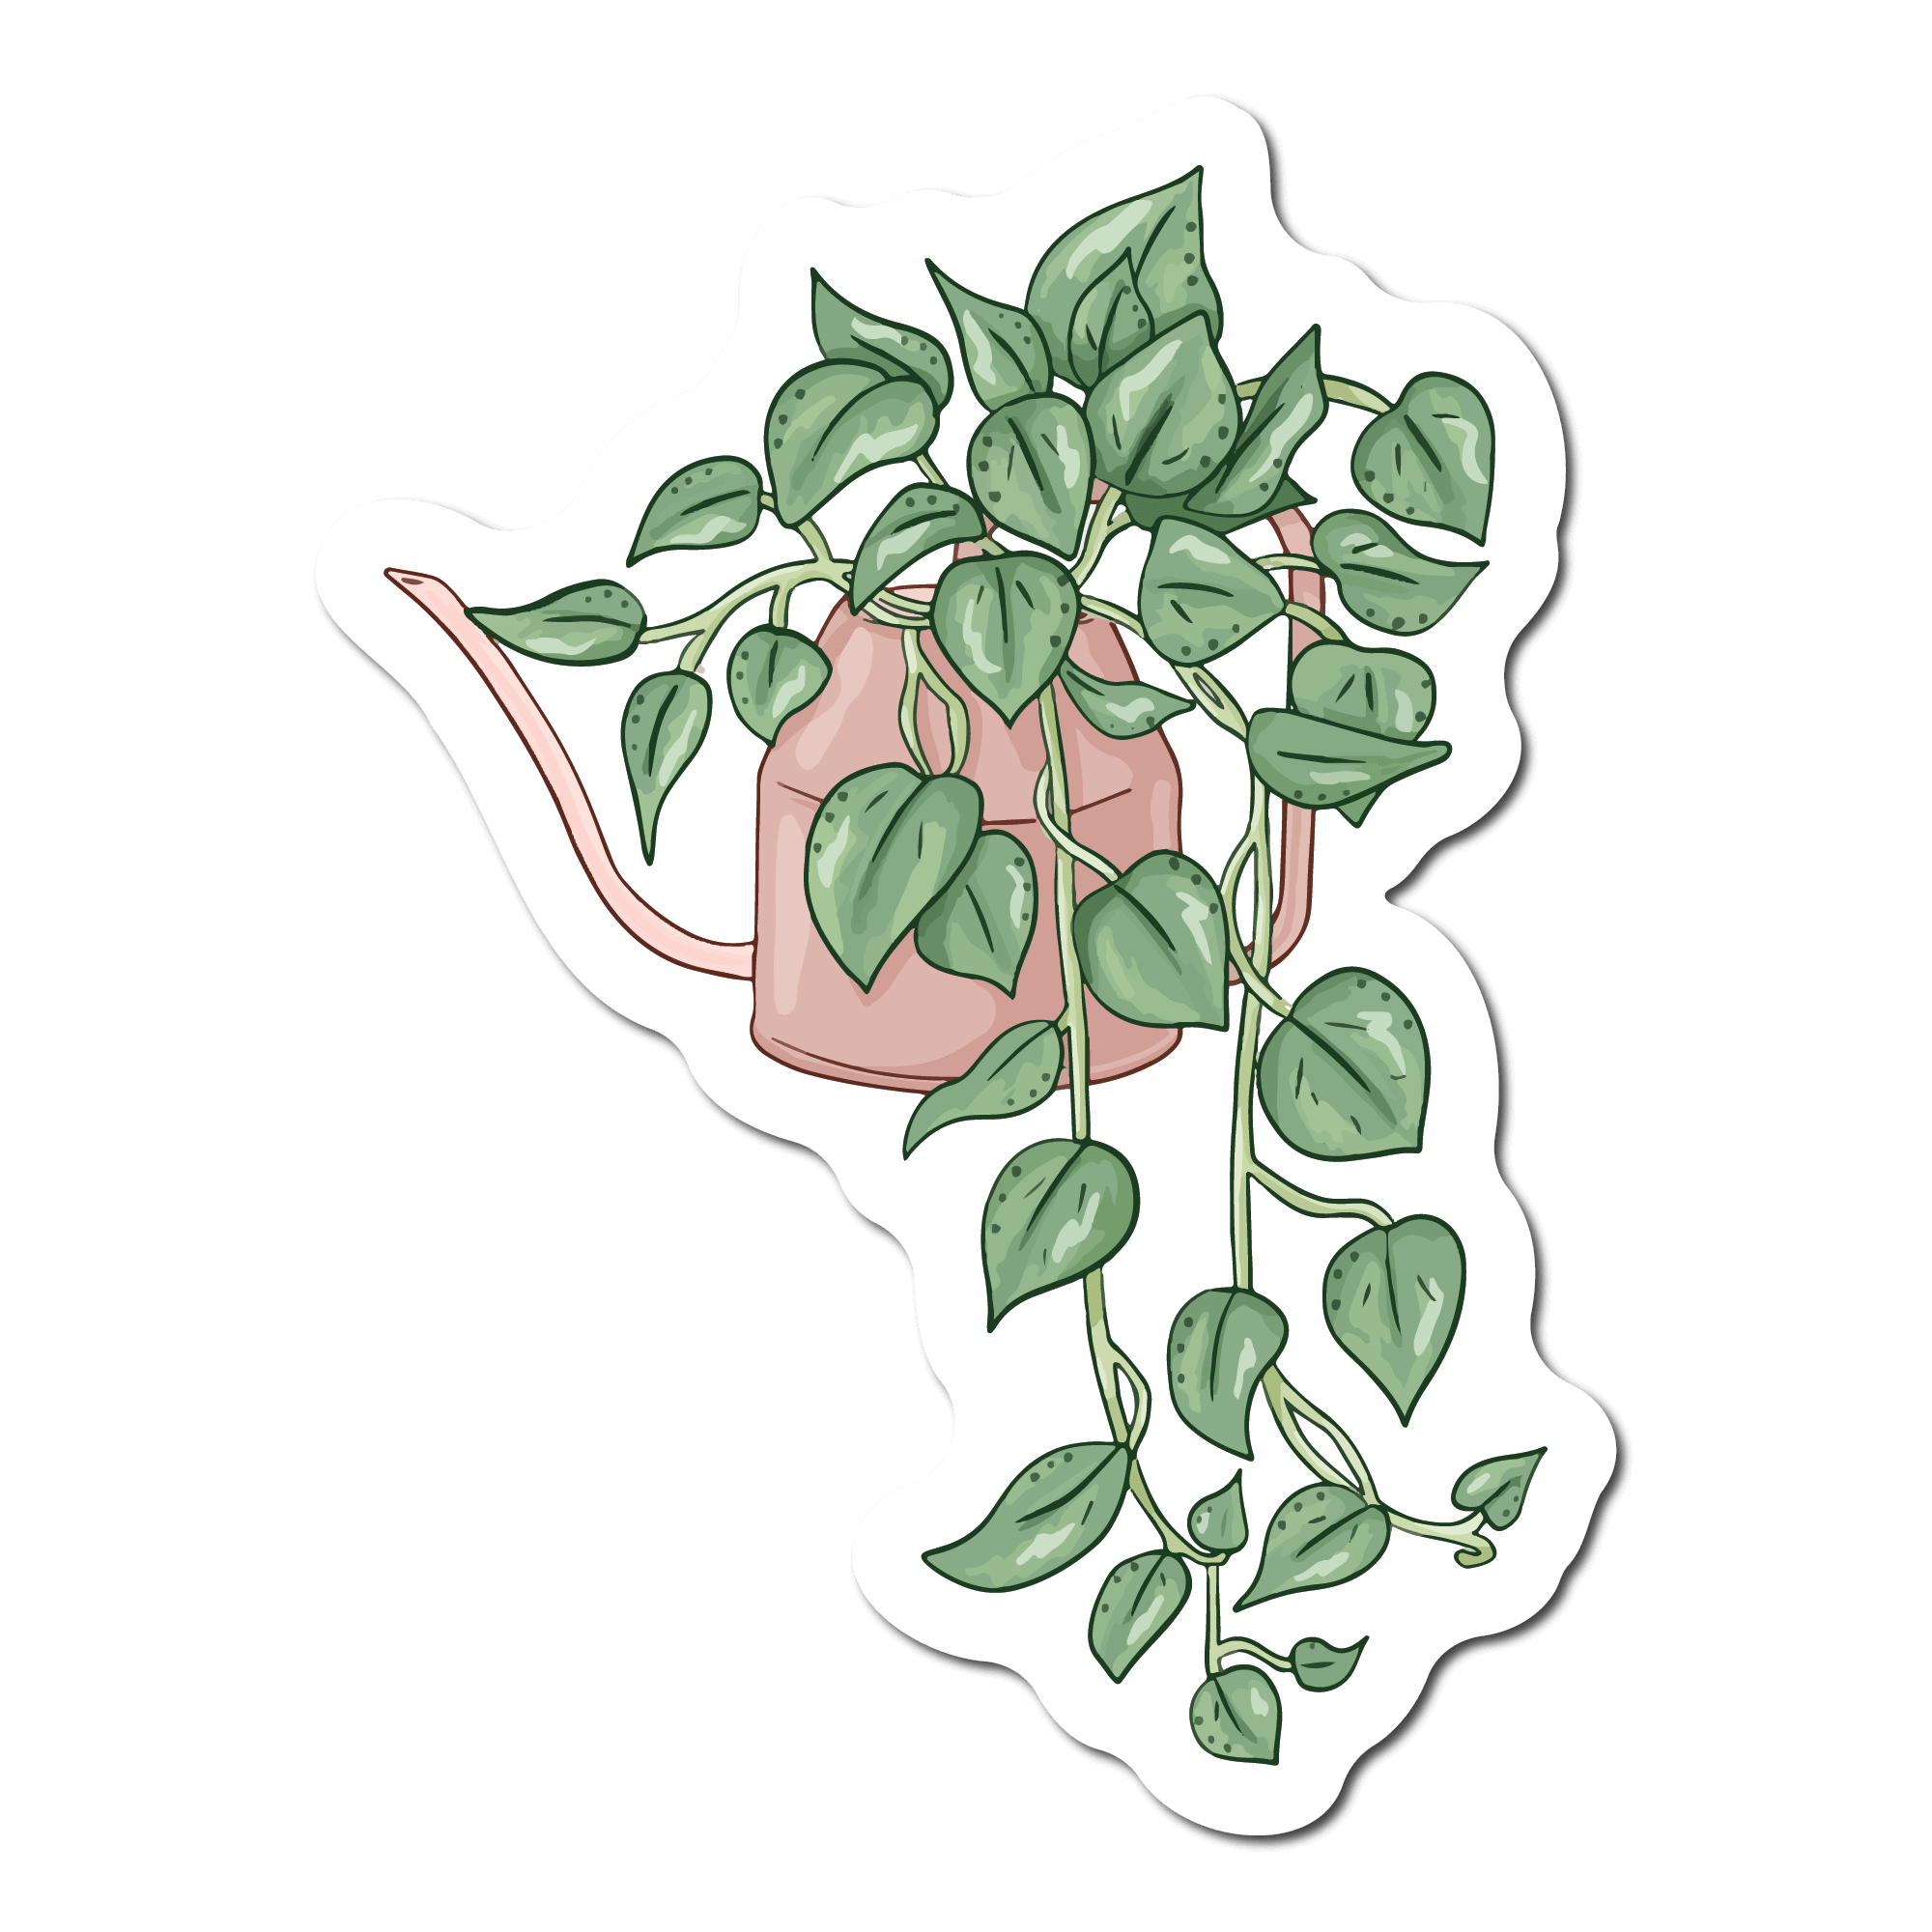 Small Sticker of a Pothos Plant that is inside a watering can